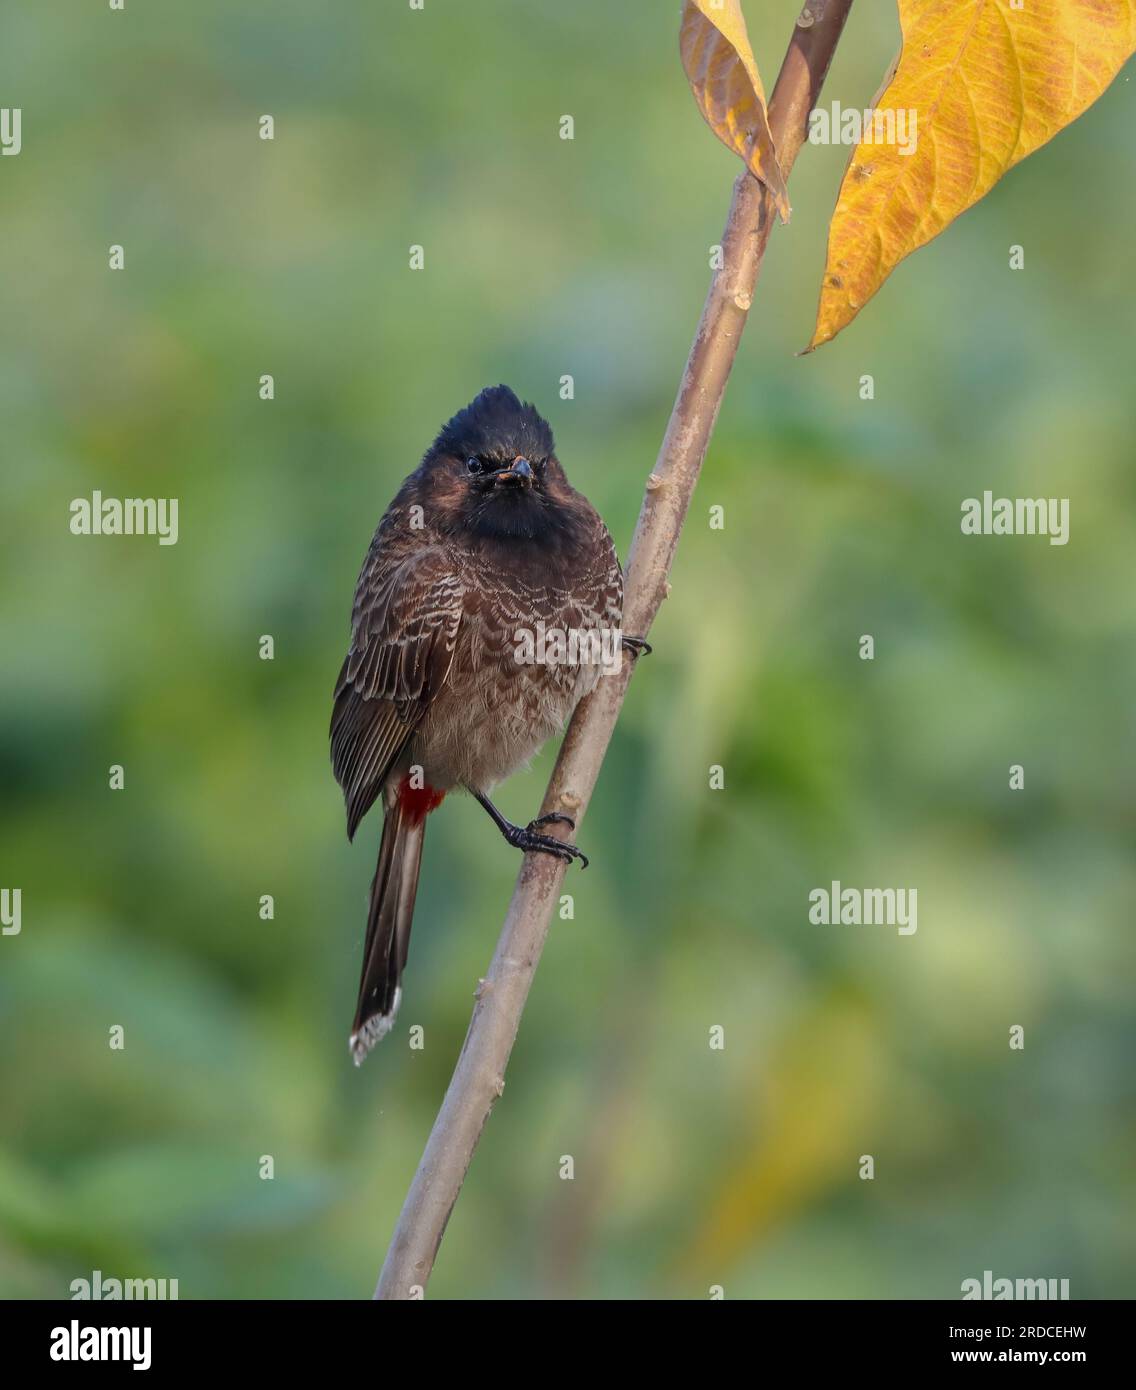 The red-vented bulbul is a member of the bulbul family of passerines. Stock Photo